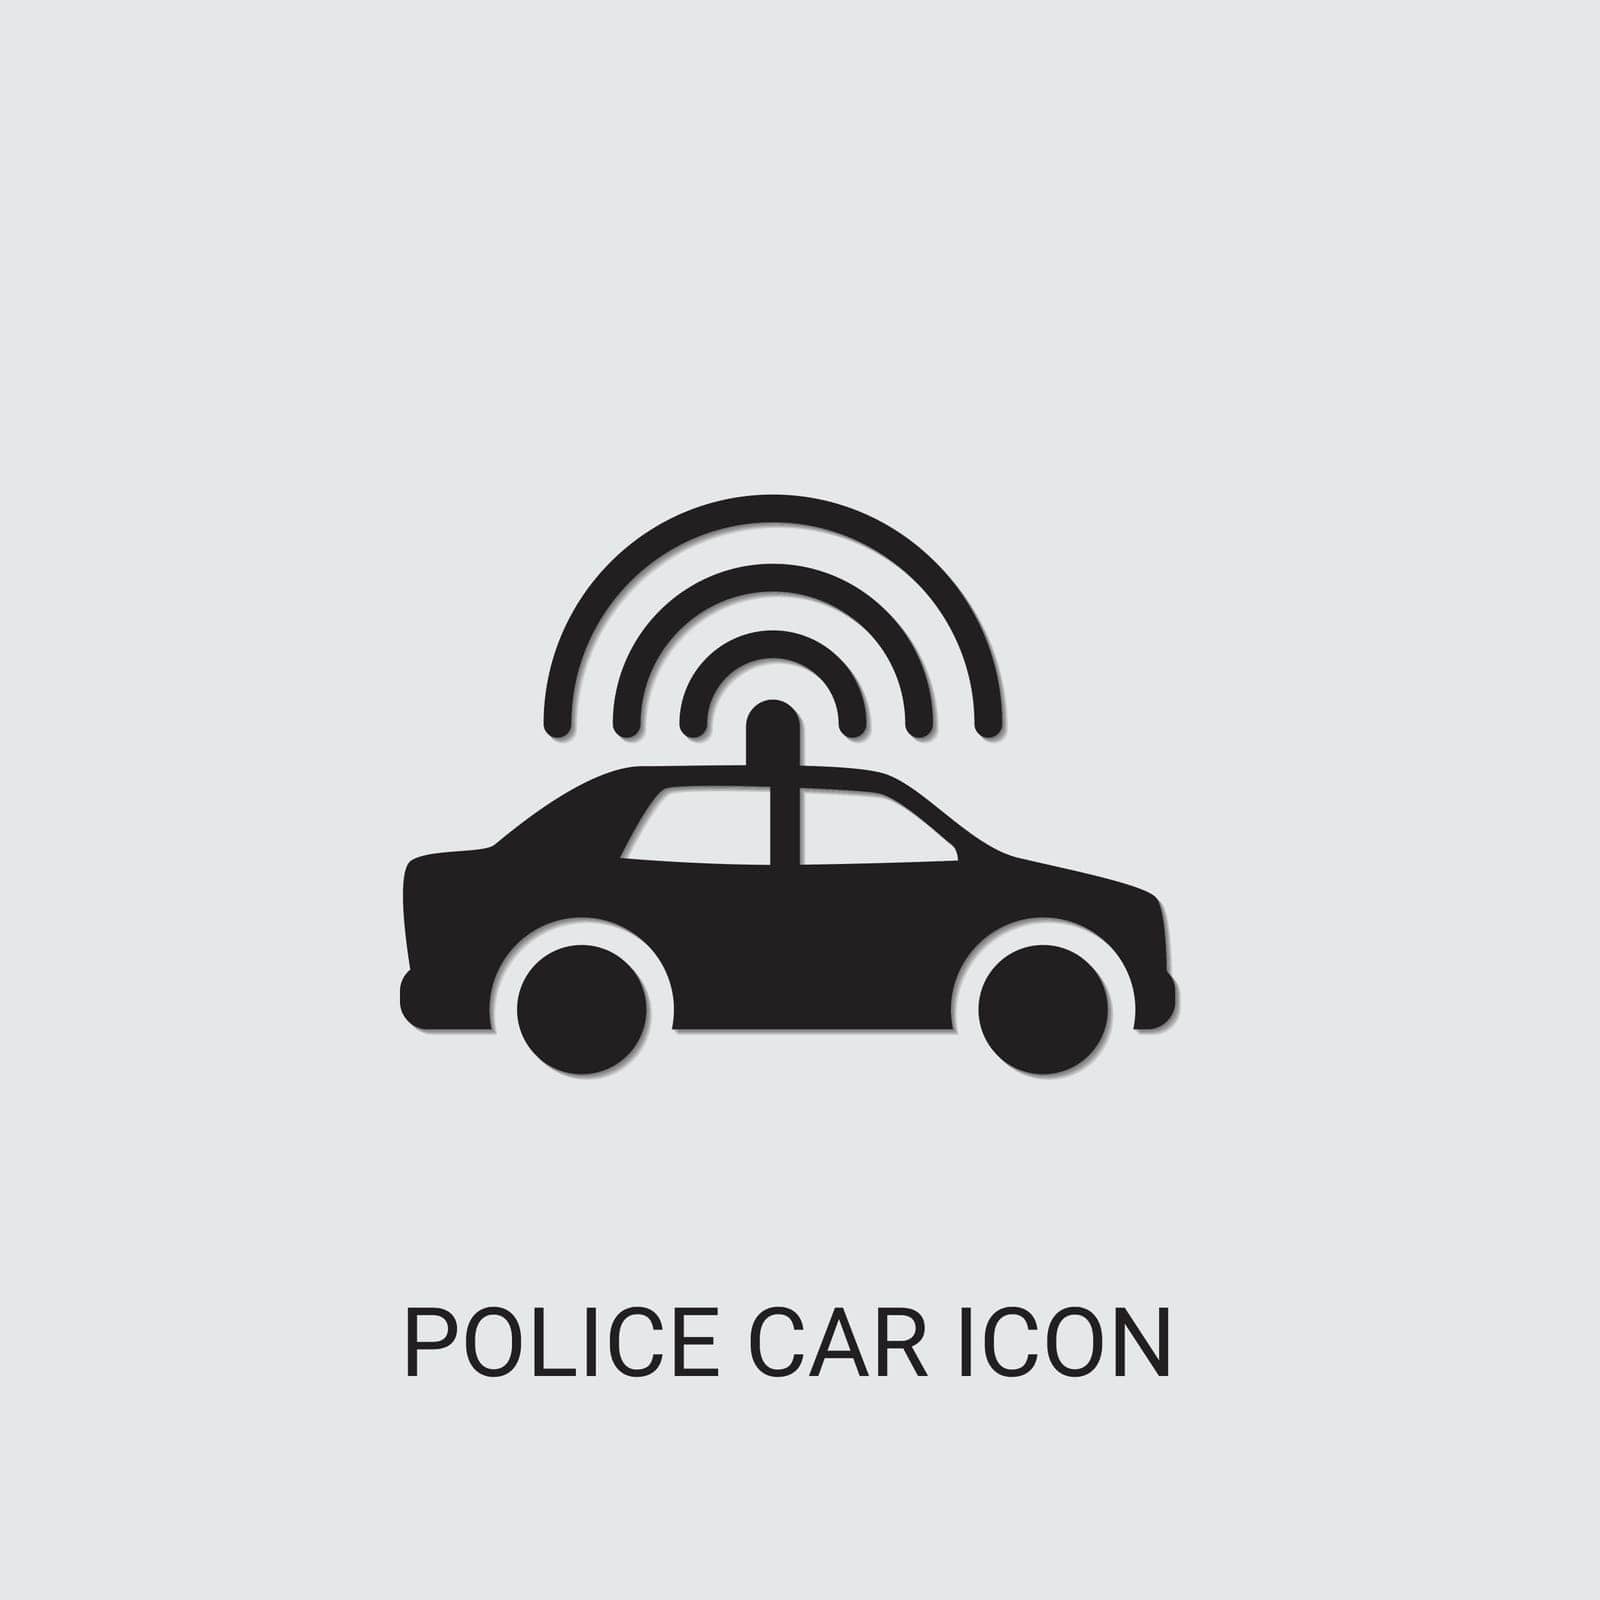 symbol,repair,mirror,siren,concept,icon,sign,isolated,mechanic,simple,chase,sheriff,car,web,flat,vector,lights,element,glass,set,black,eps,filled,airport,police,light,background,machine,illustration,windshield,policeman by ogqcorp